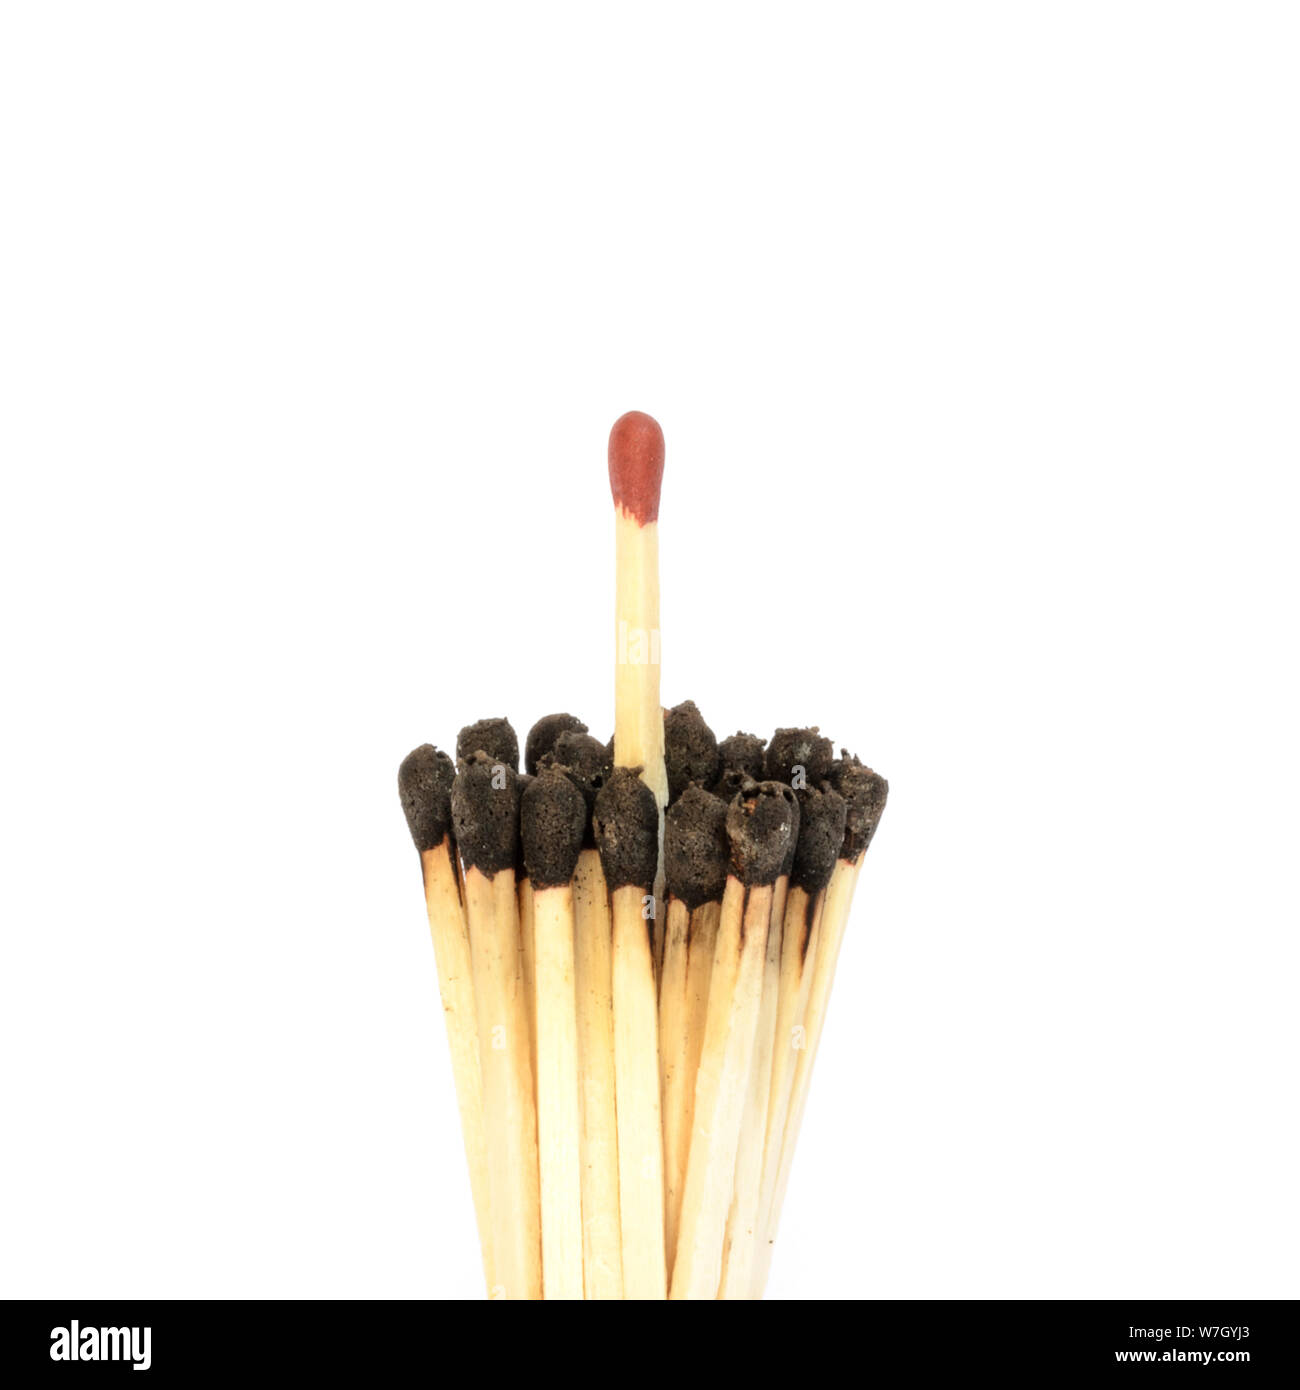 Red matchstick among a bundle of burnt ones Stock Photo